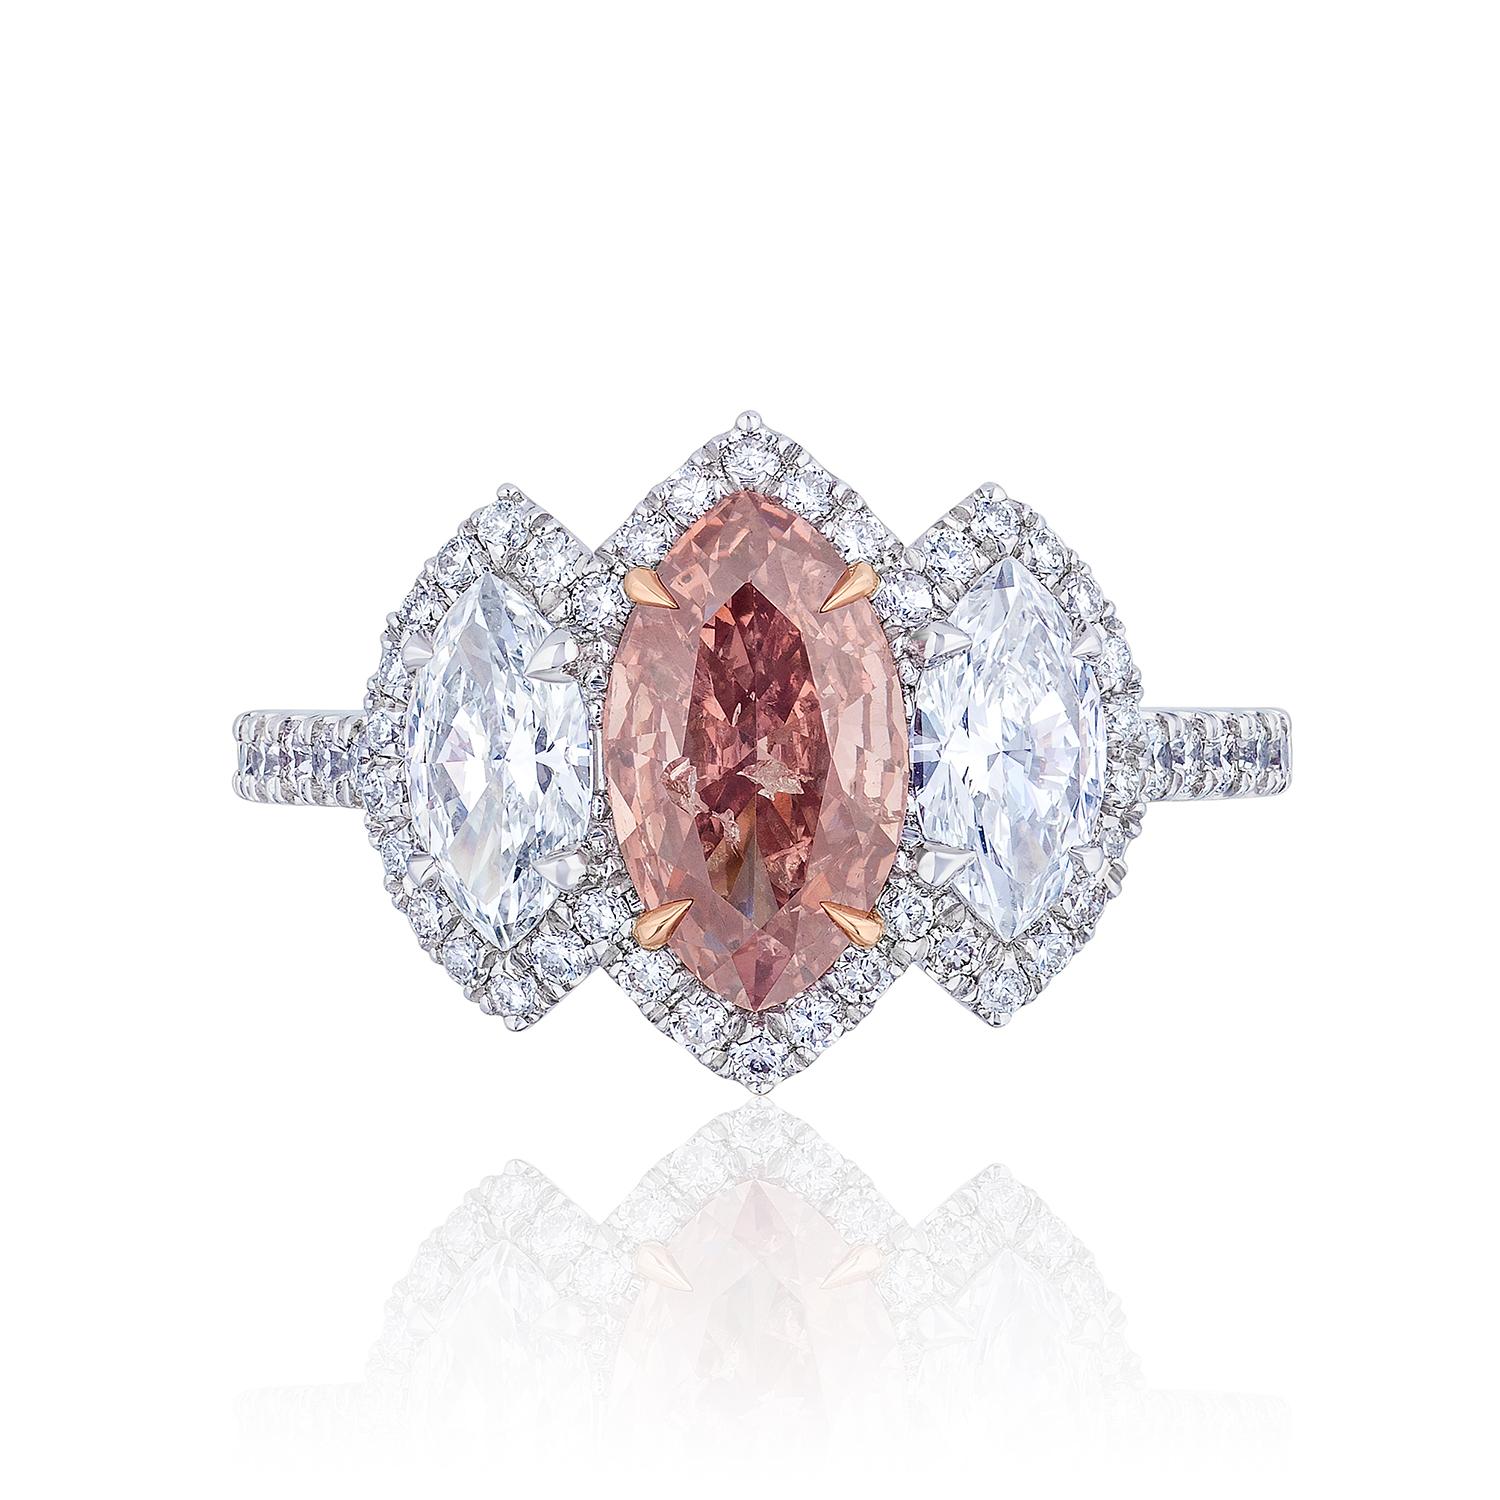 Marquise shaped Diamond weighing 1.01 Carats with GIA certificate stating the diamond is Fancy Deep Orangy Pink. Very unique color.

Flanked by Marquise shaped white Diamonds weighing 0.80 Carats of F color and VS Clarity.

Set in Platinum. Center